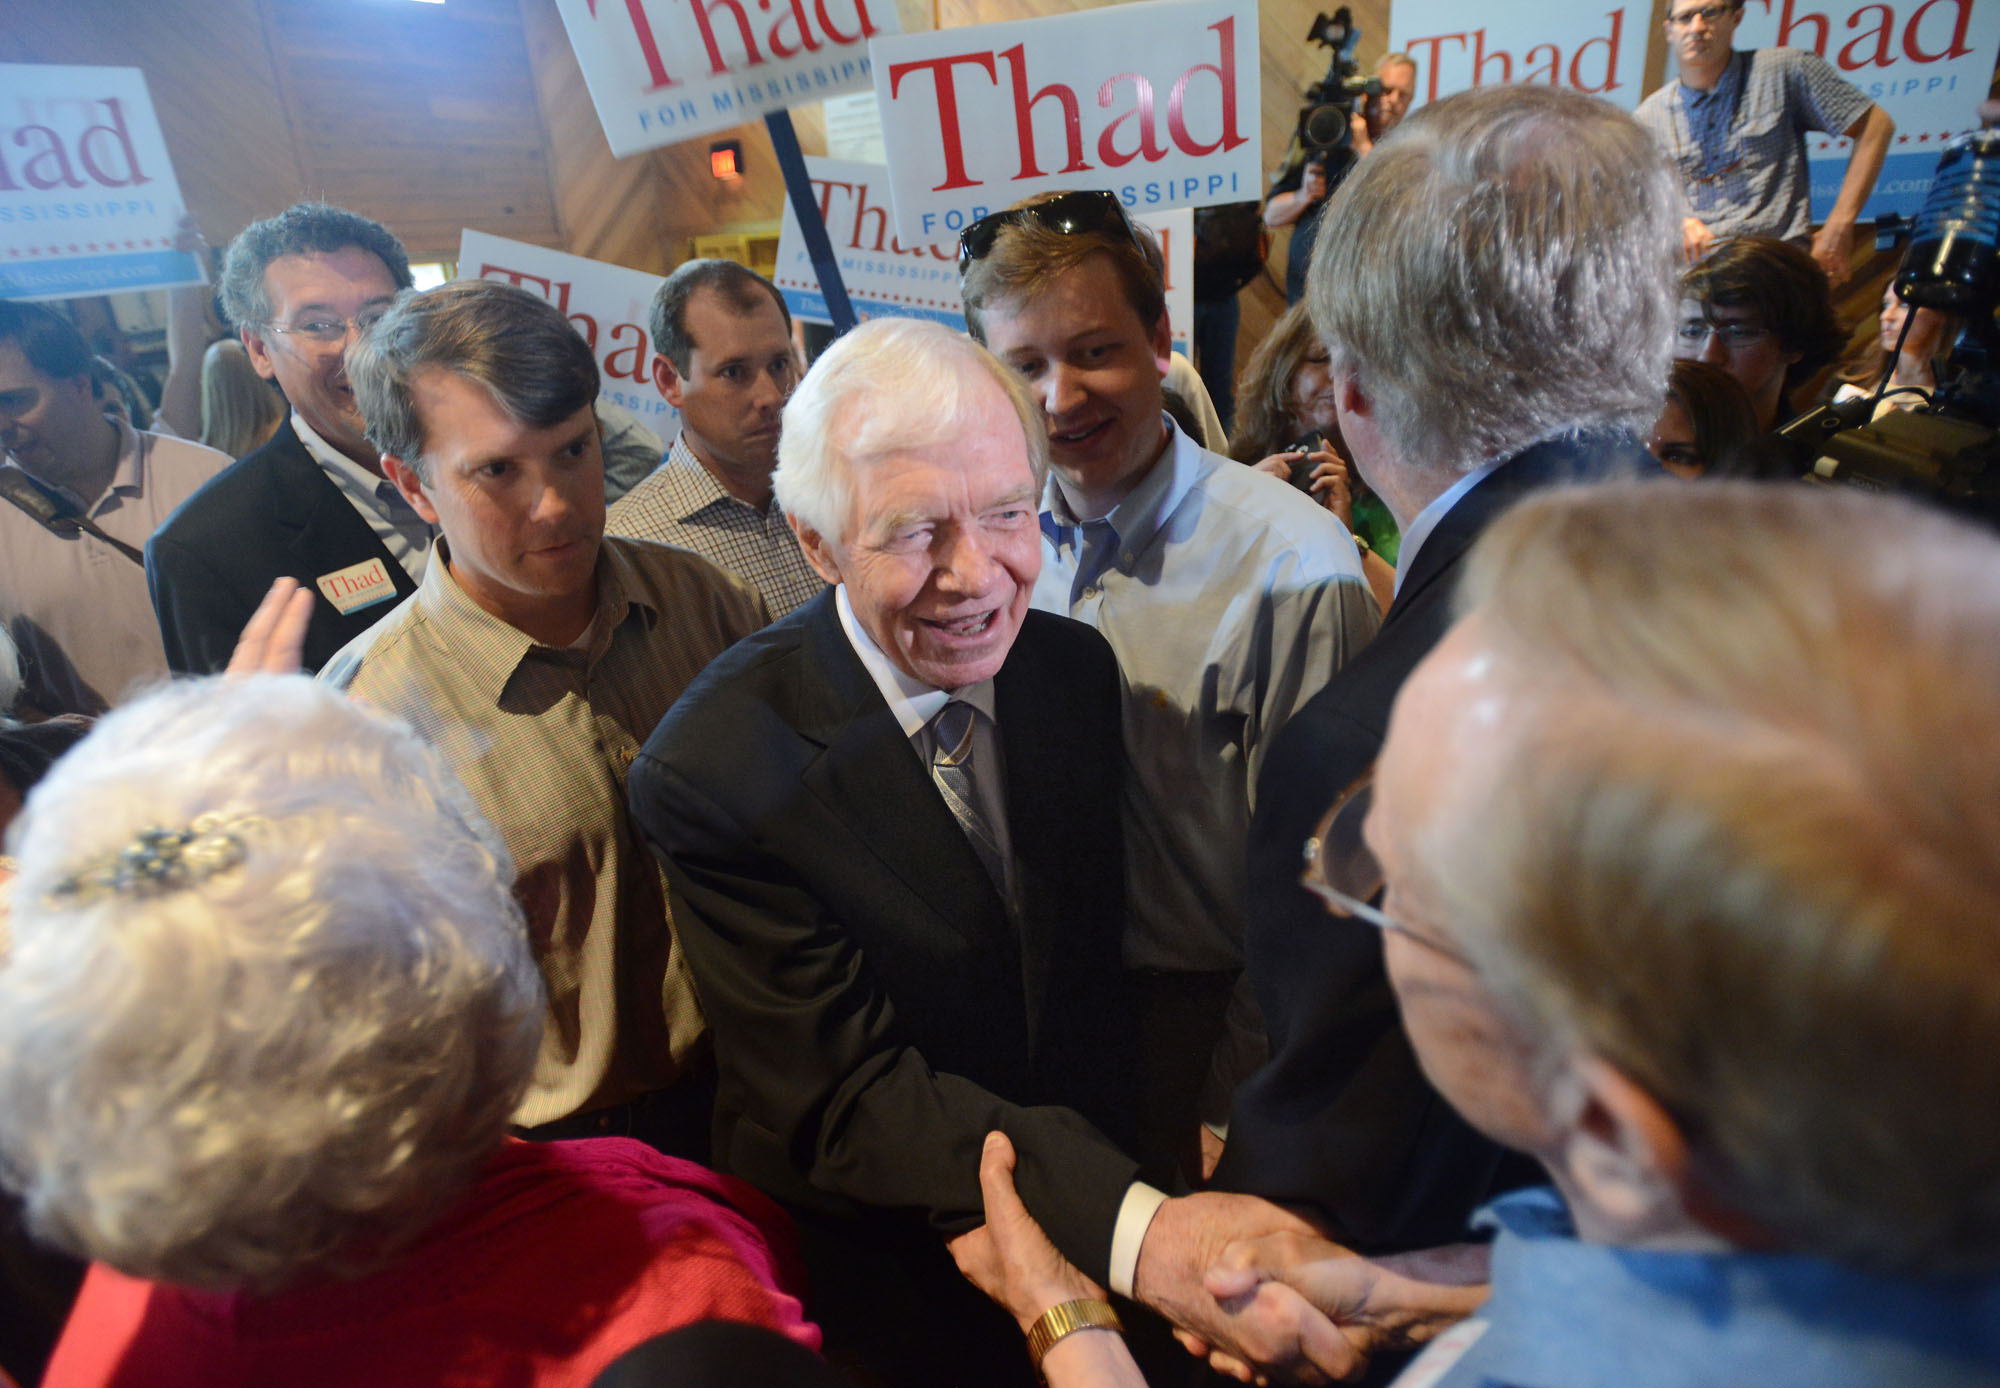 U.S. Sen. Thad Cochran, R-Mississippi, greets supporters at a pre-election day rally at the Mississippi Agriculture and Forestry Museum in Jackson, Miss., on  June 2, 2014. (Joe Ellis—AP)